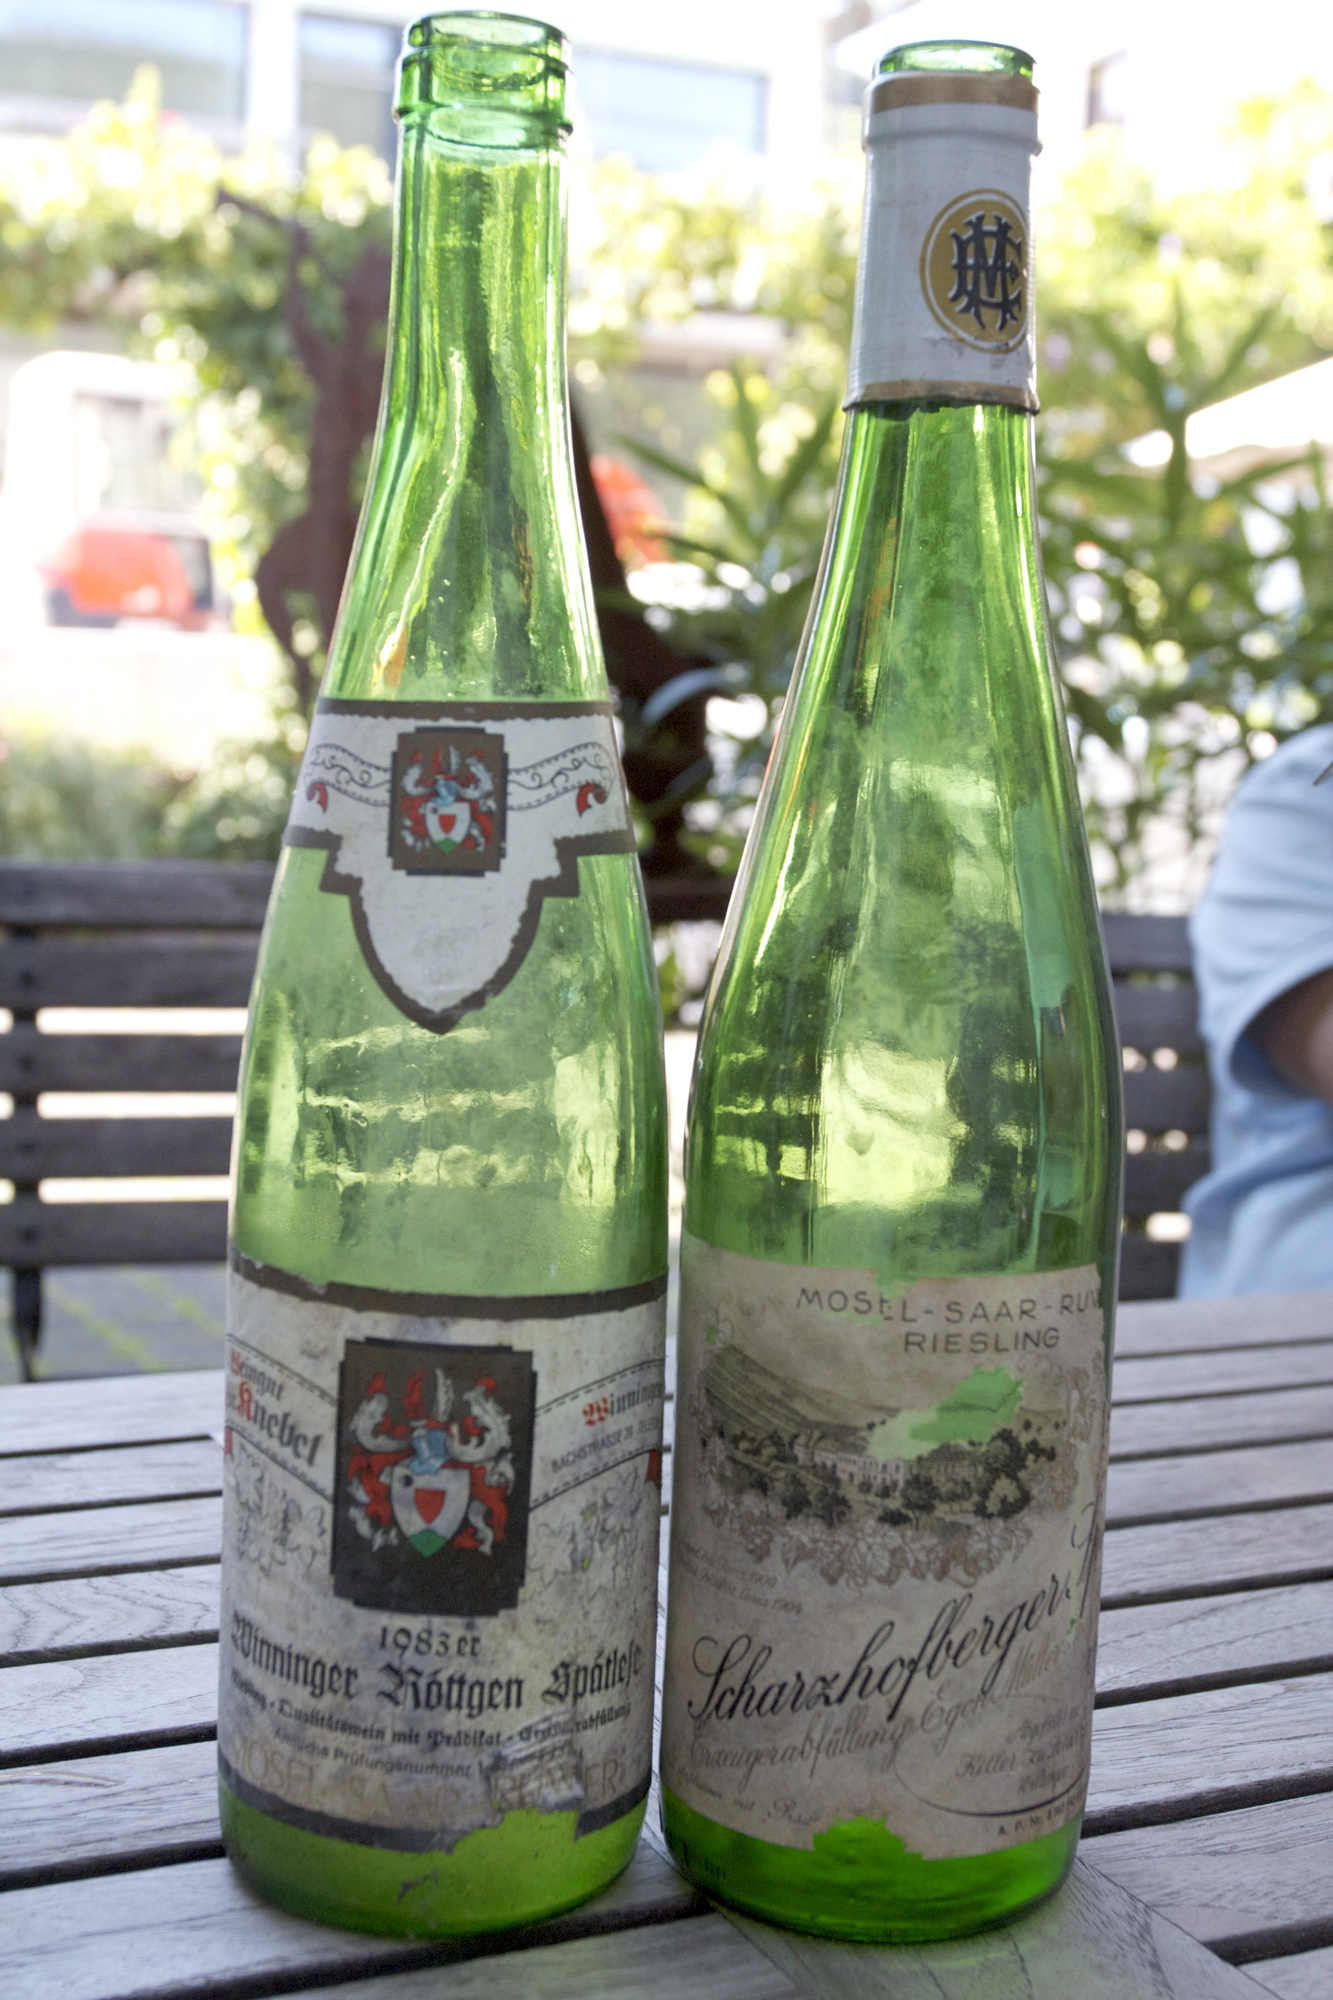 A comparison of two Rieslings from 1983